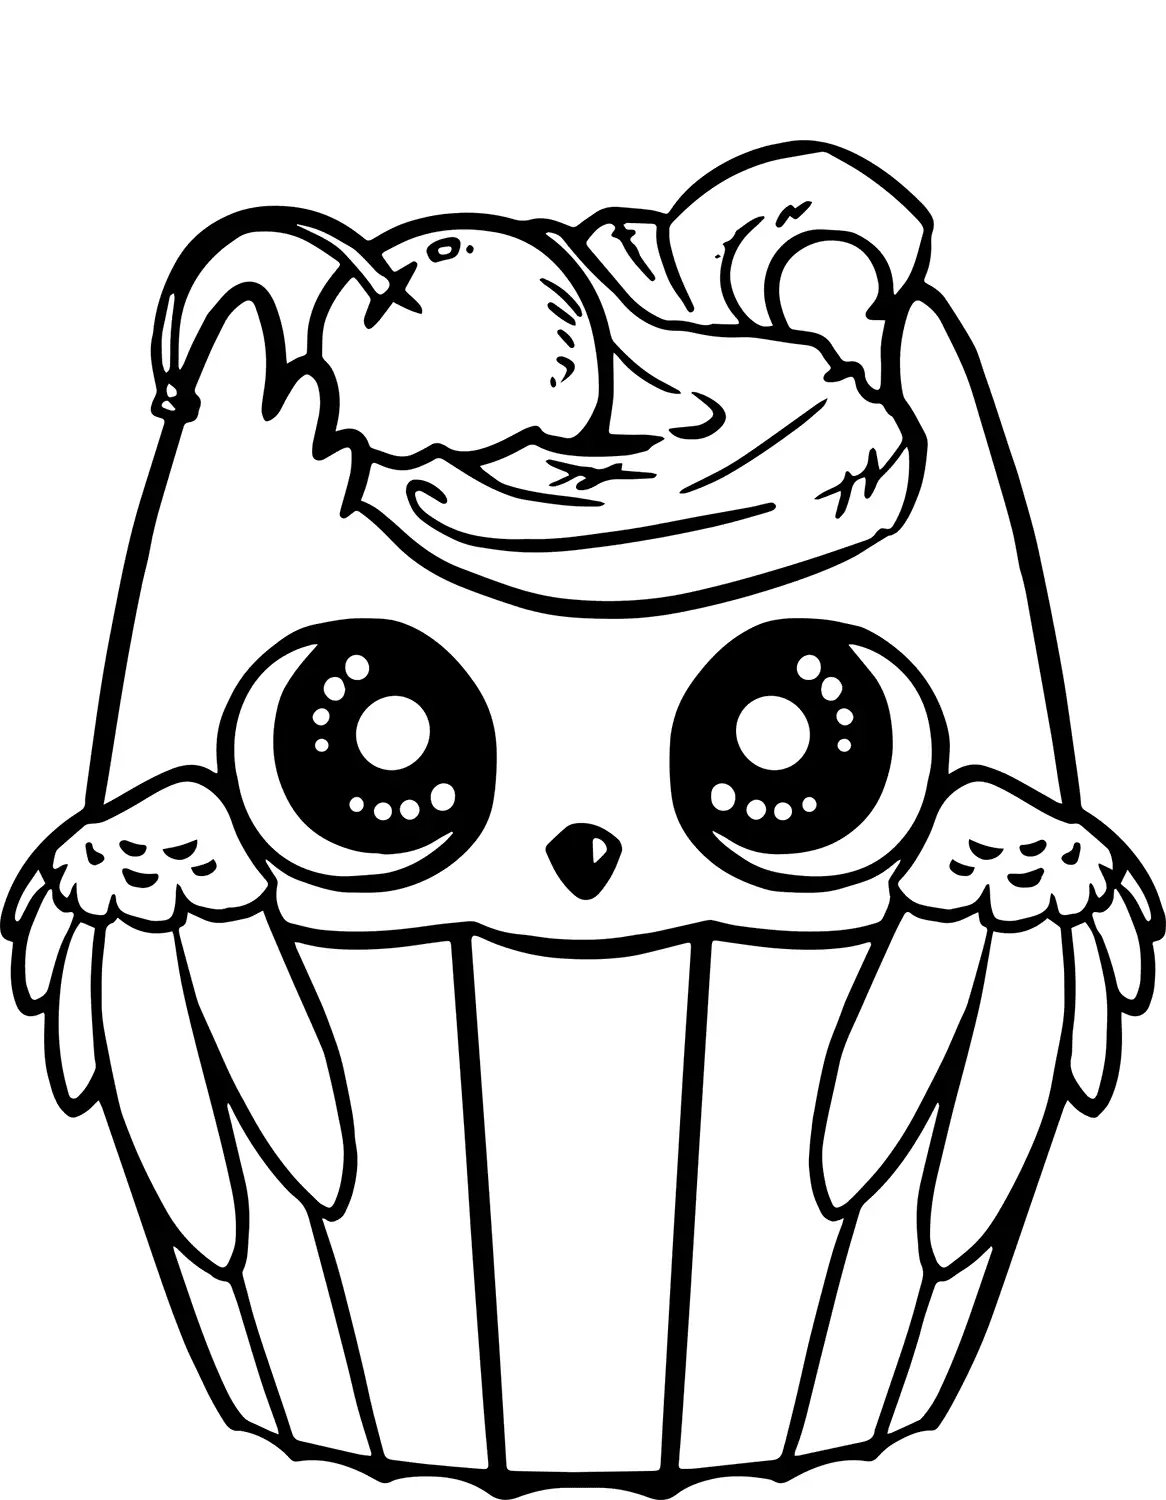 Line Drawing CUPCAKE OWL CHERRY ON TOP Coloring Pages for Kids Art Project